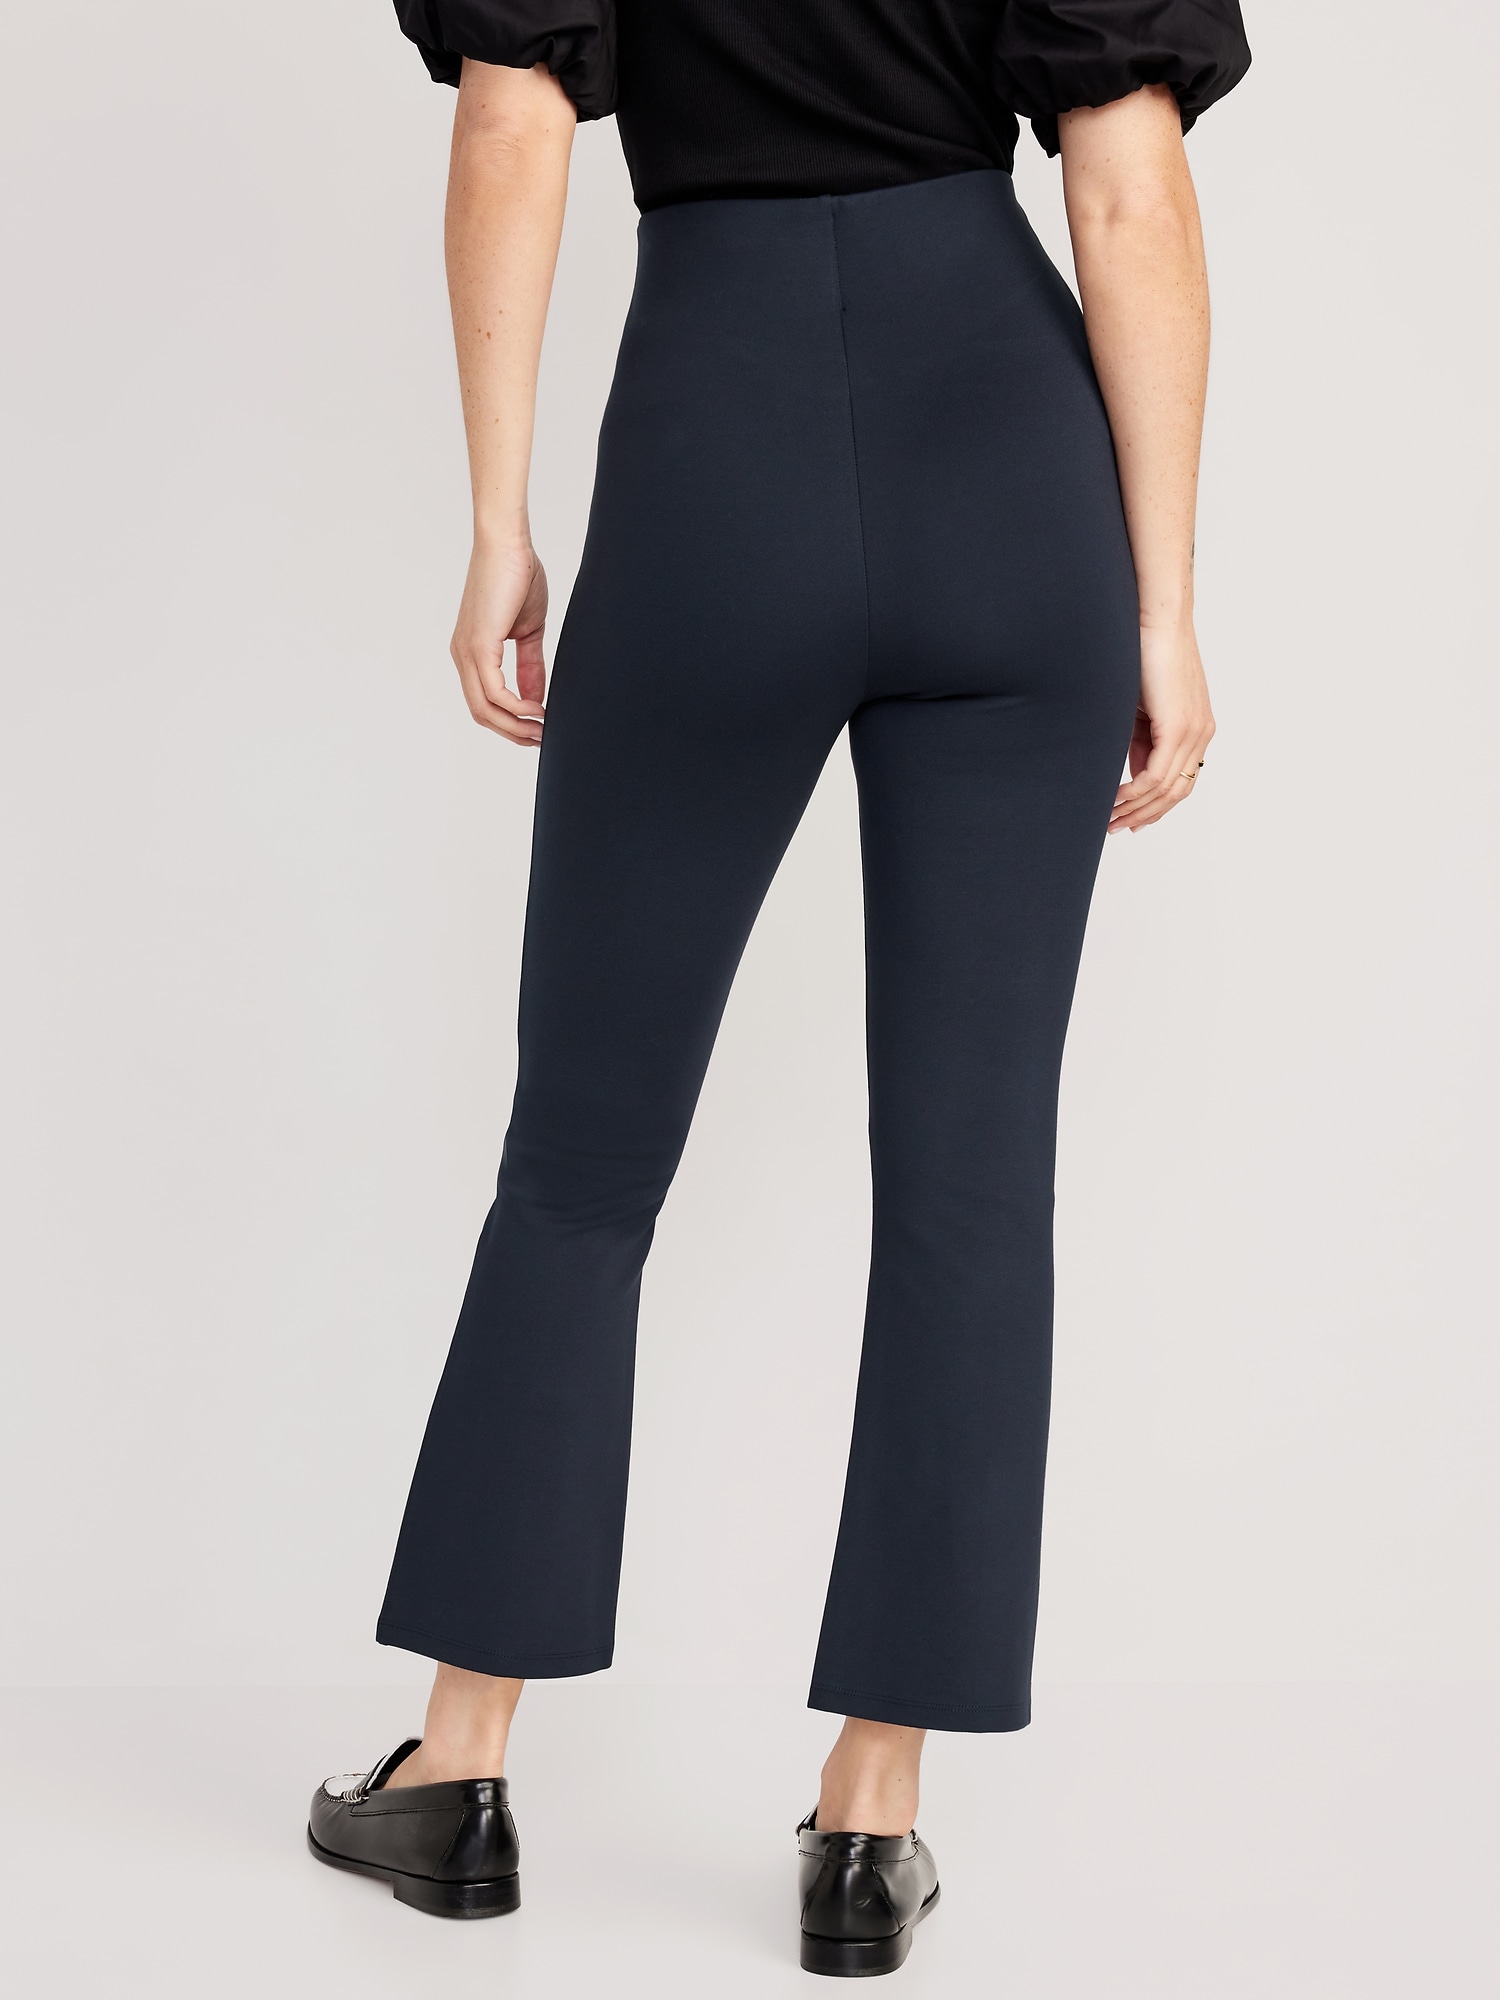 TRF MID-RISE FLARE CROPPED JEANS - Black | ZARA United States